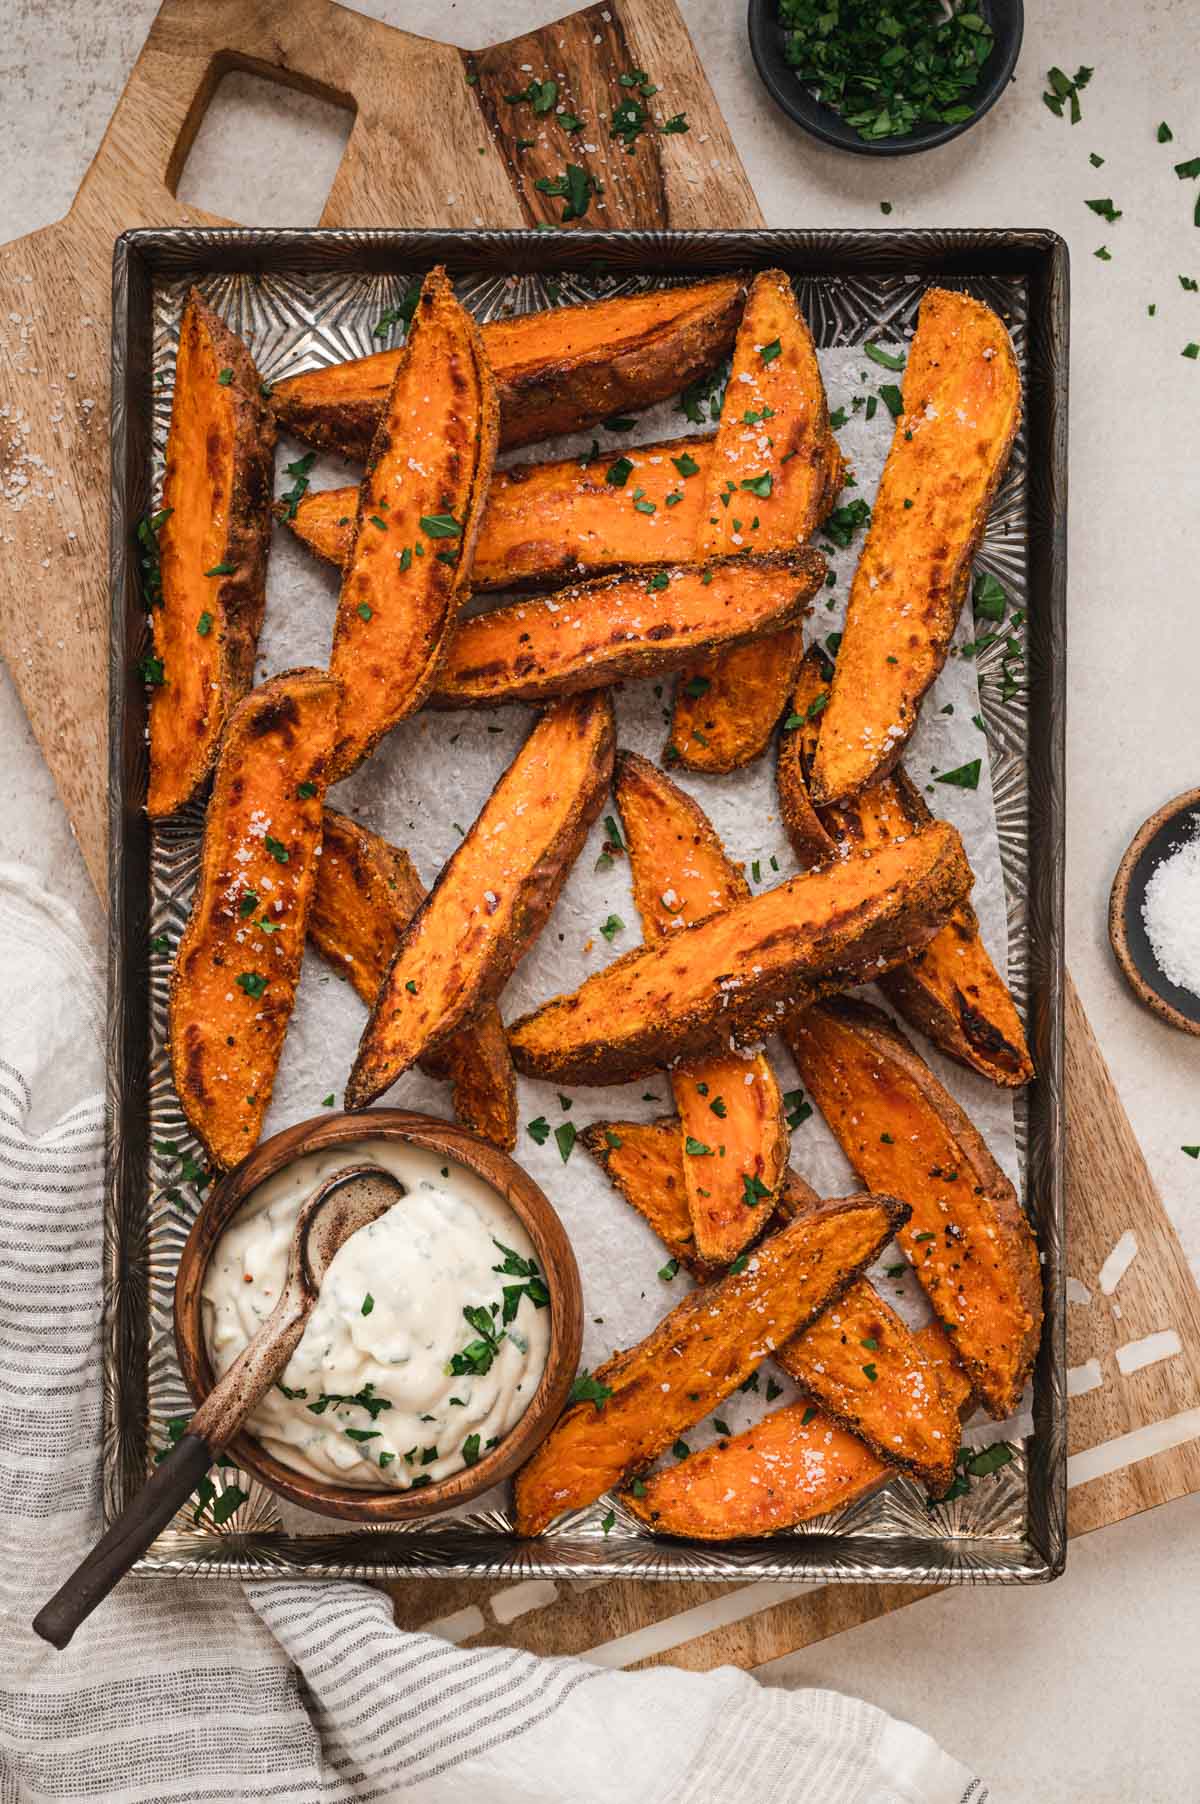 Sweet potato wedges on a baking sheet with minced parsley garnish and a creamy dipping sauce.